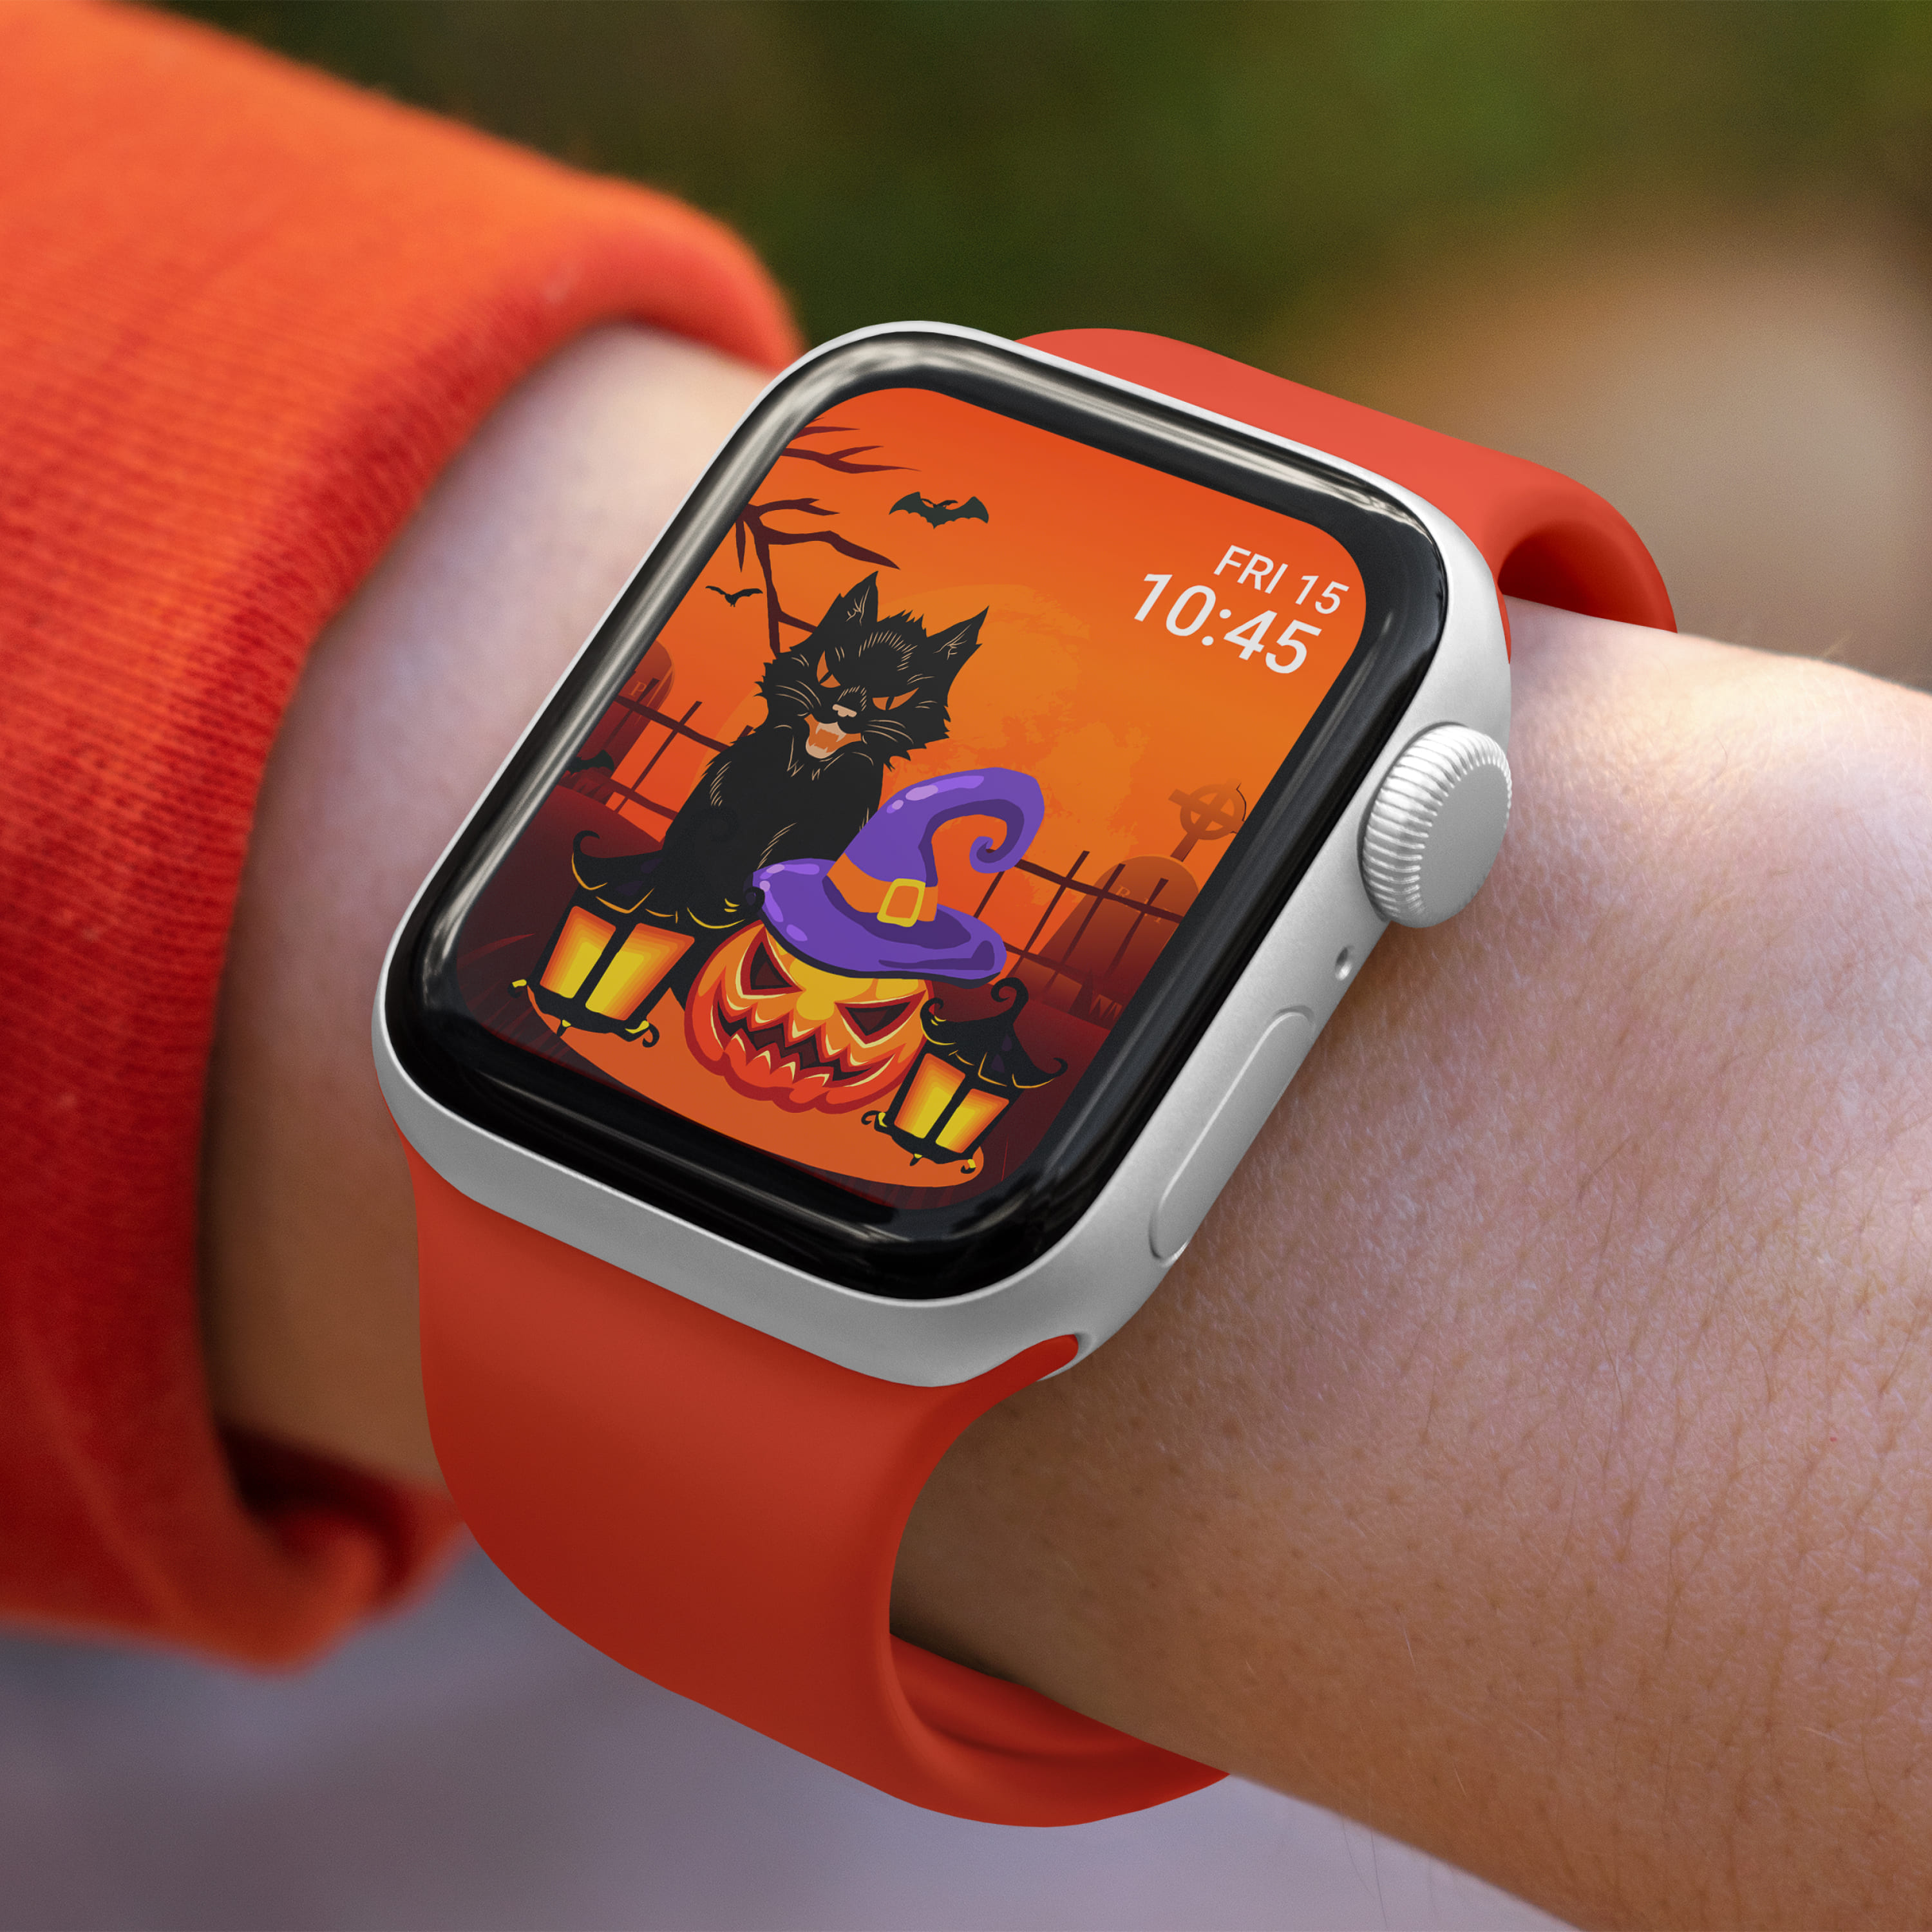 Red apple watch with halloween illustrations.